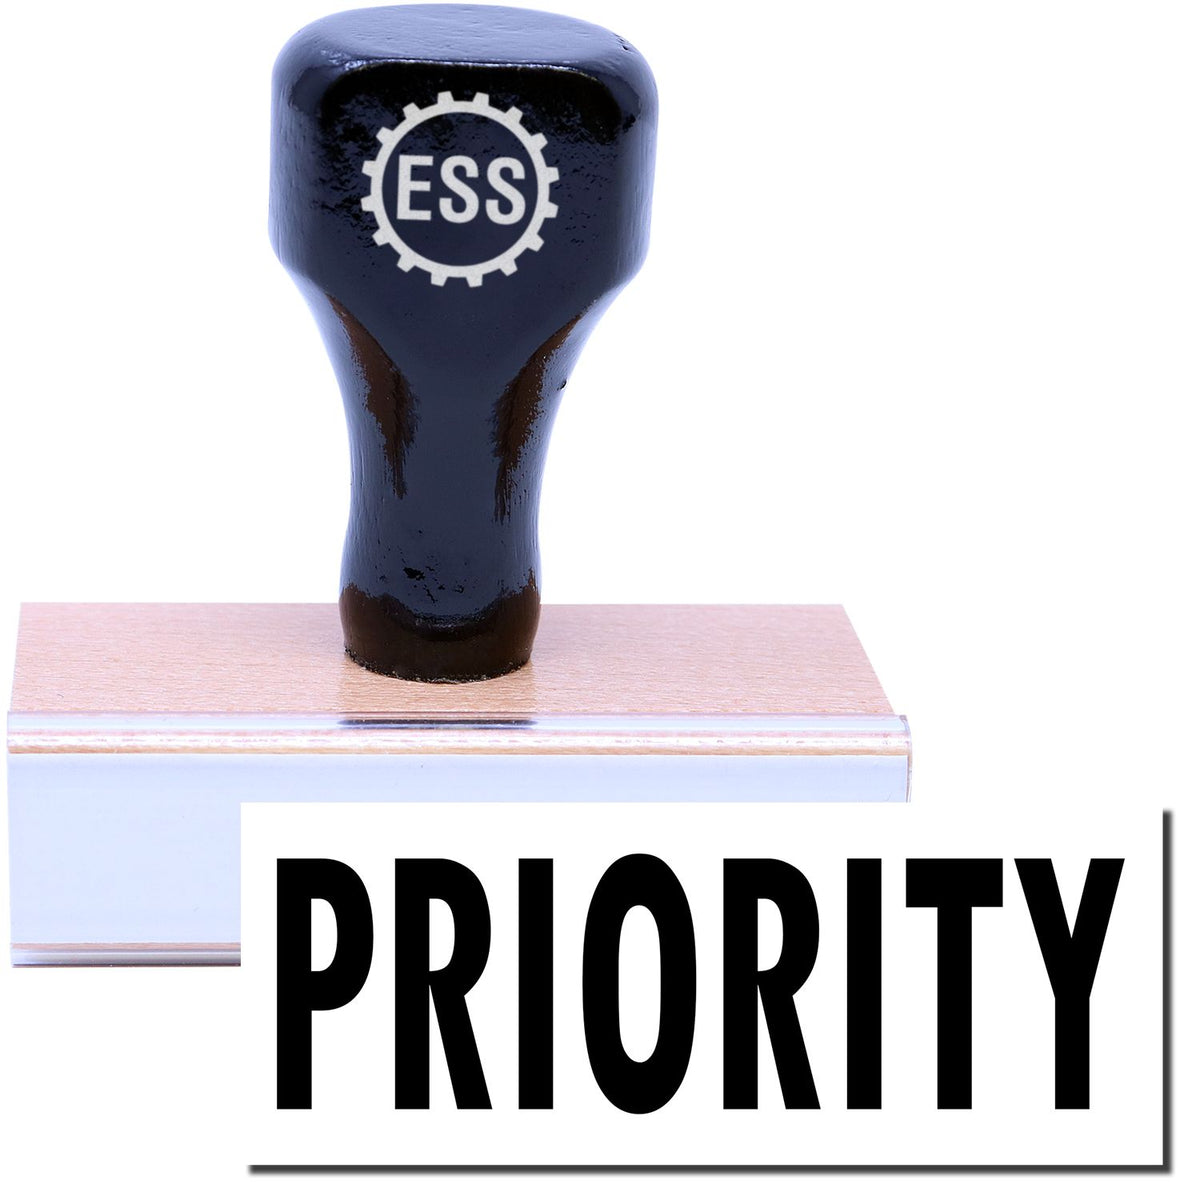 A stock office rubber stamp with a stamped image showing how the text &quot;PRIORITY&quot; in a large font is displayed after stamping.